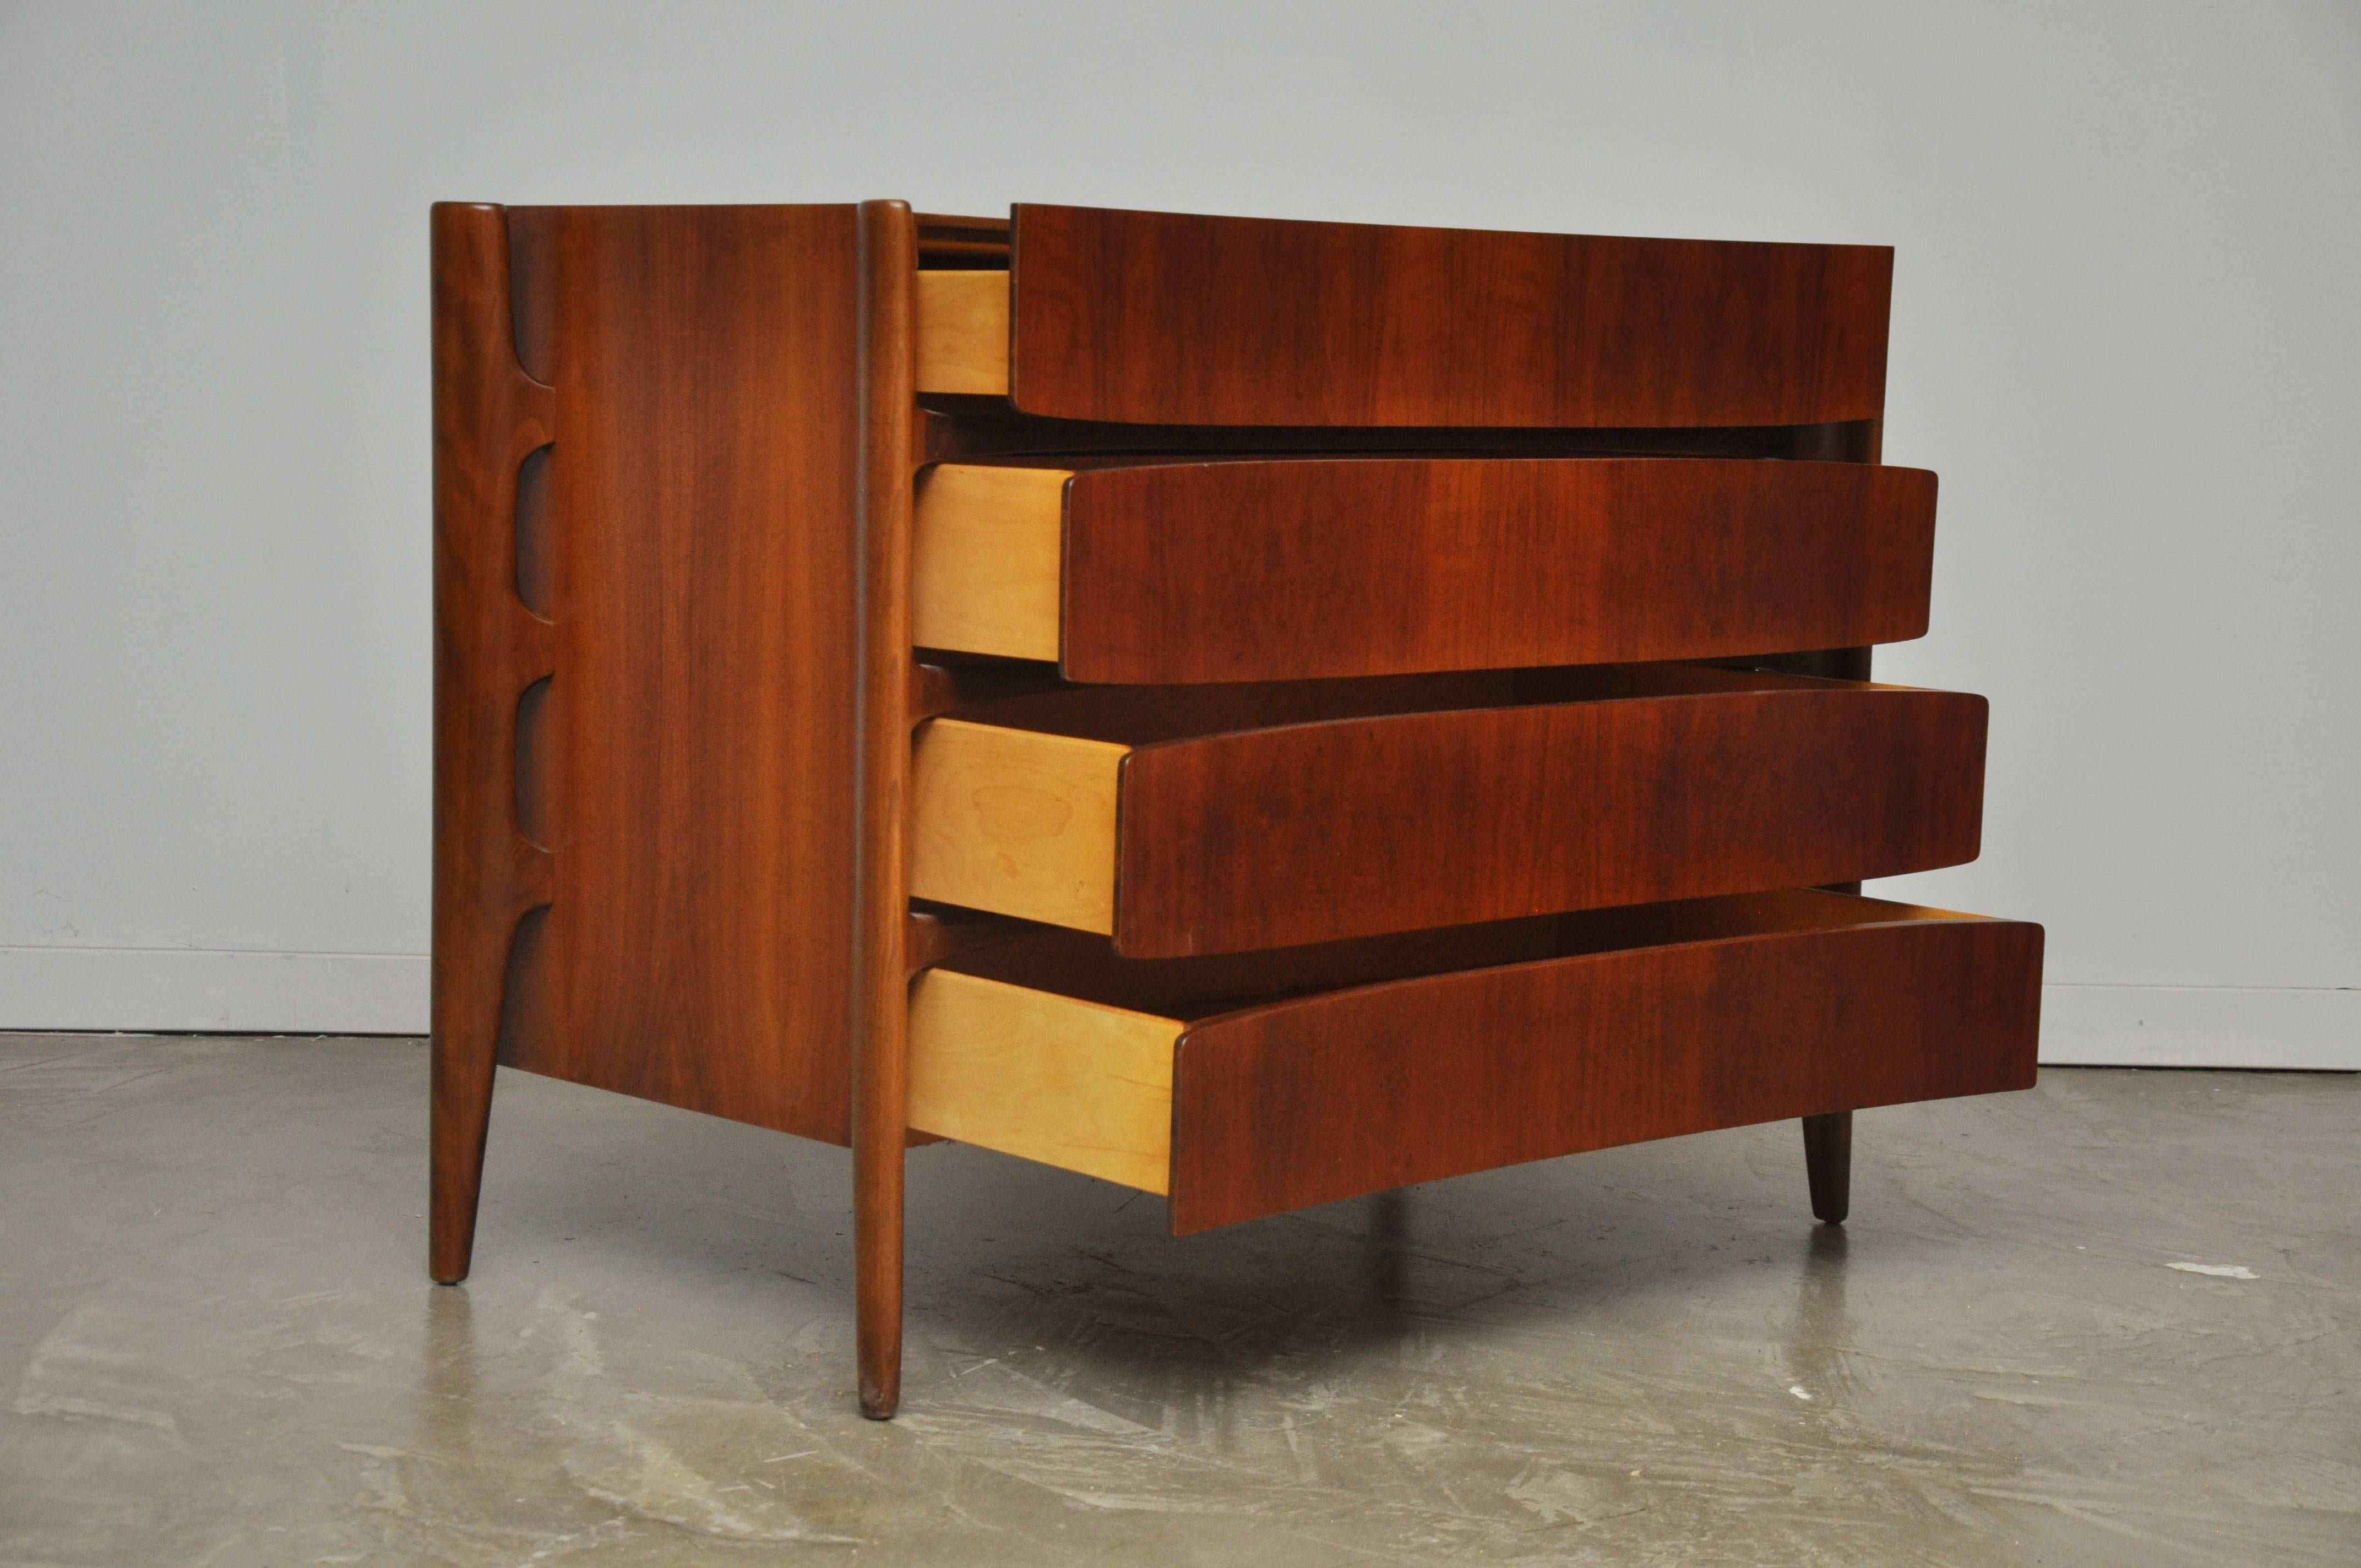 Beautiful walnut chest by William Hinn with exposed exoskeleton frame. Fully restored and refinished.
 